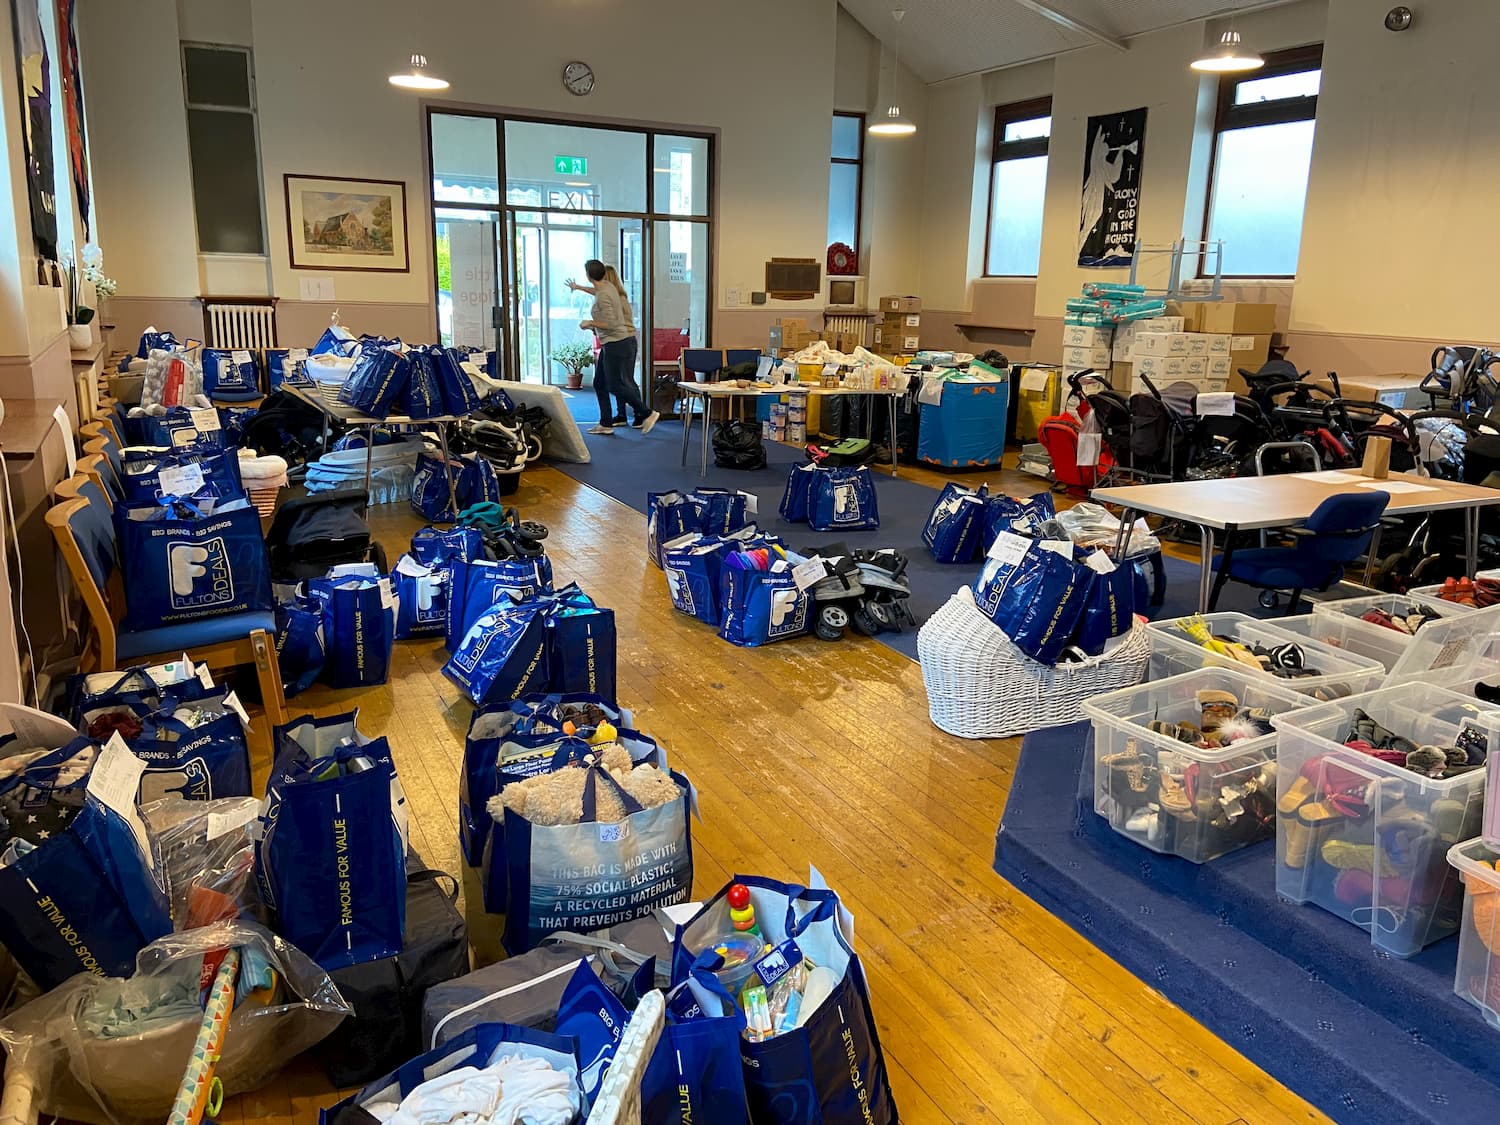 A room filled with donations for a children's charity